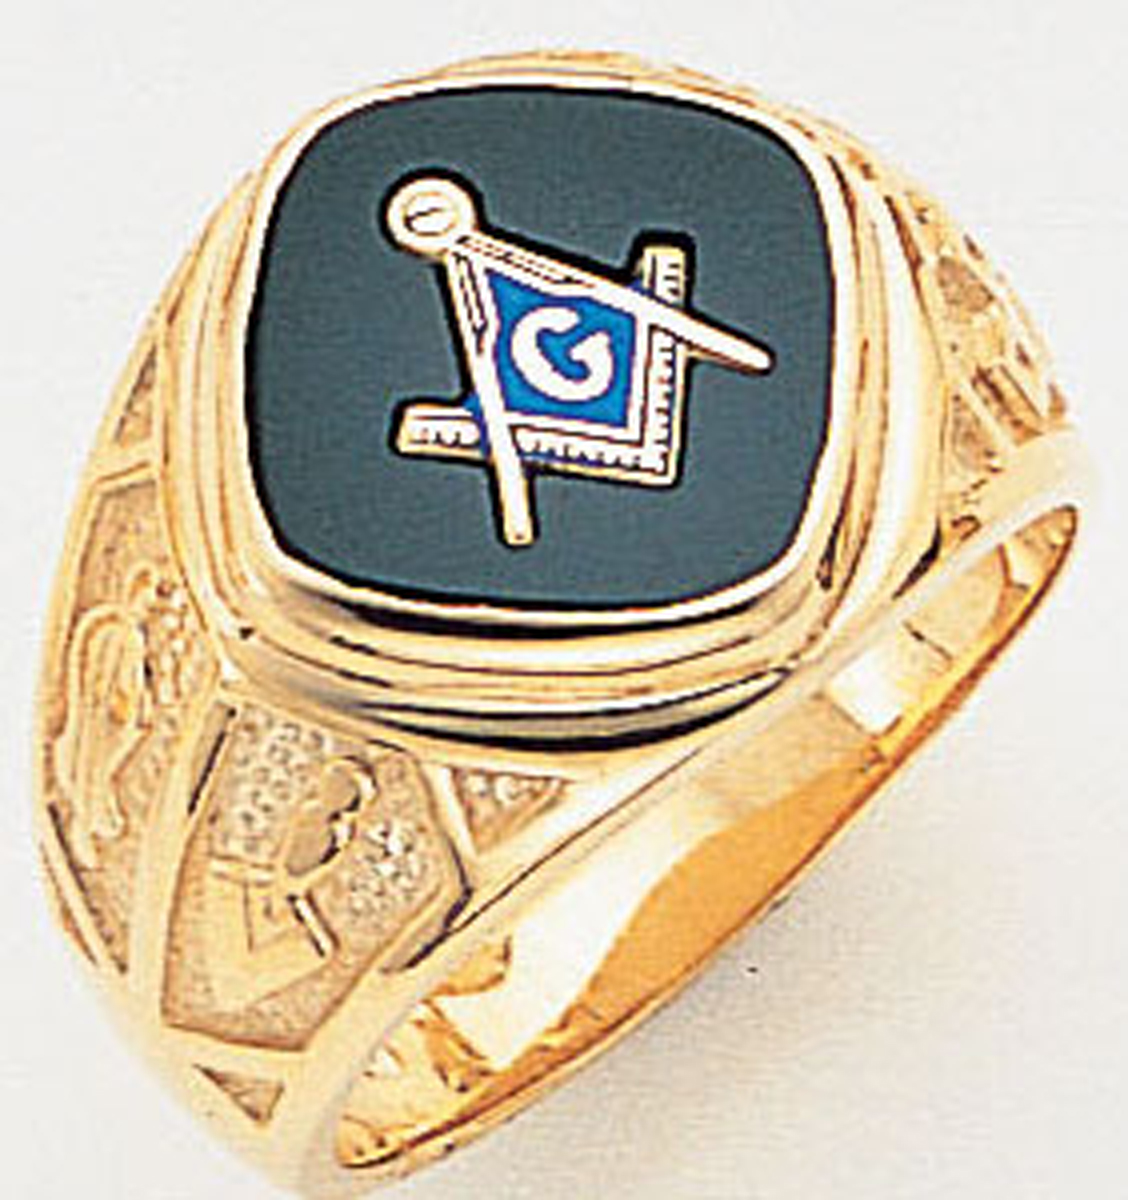 Master Mason ring Diamond shaped stone & rounded edges with S&C and "G"- Sterling Silver